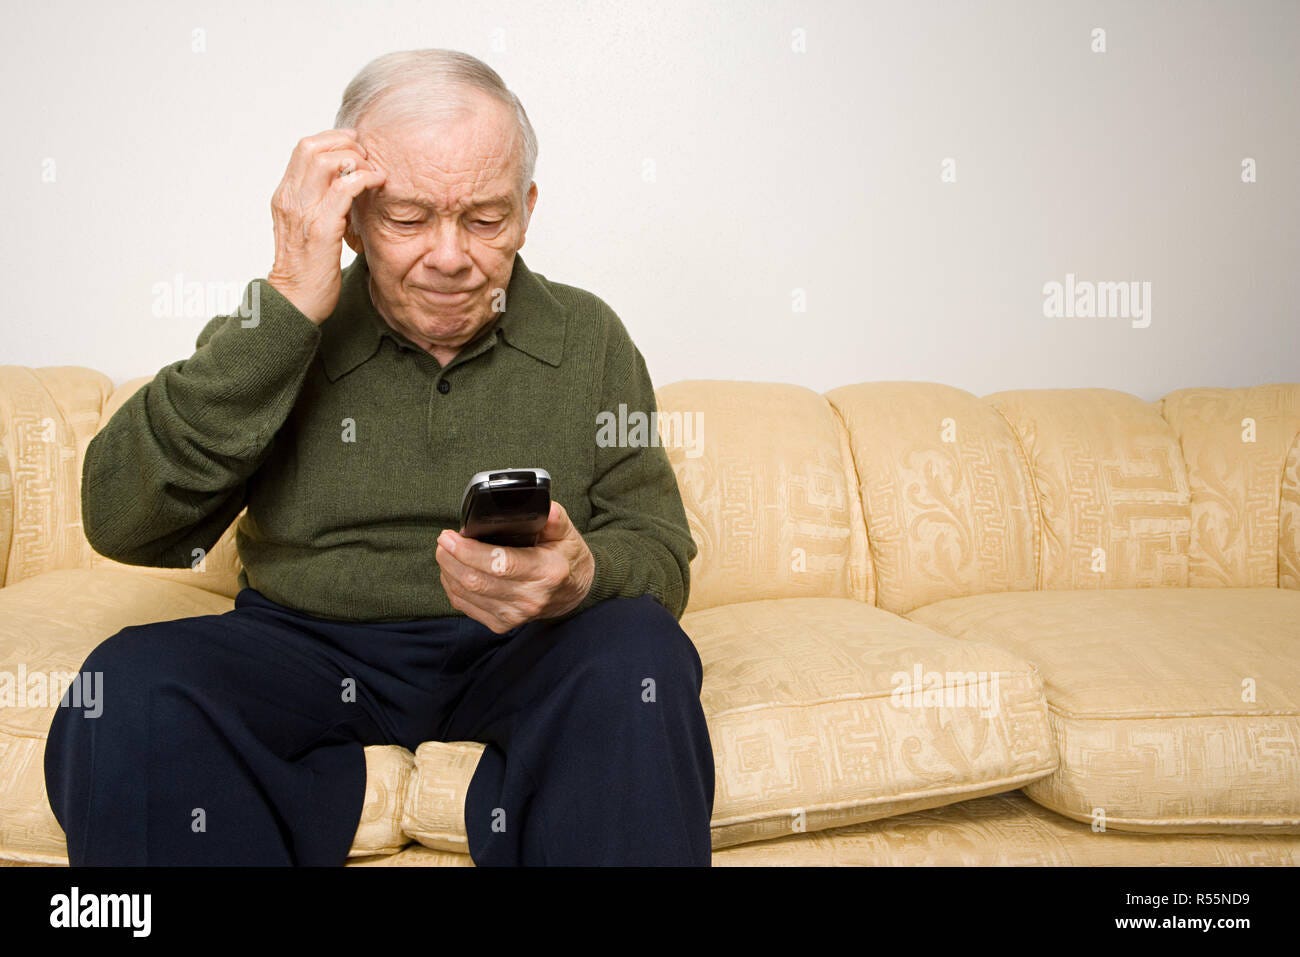 Confused elderly man with remote control Stock Photo - Alamy